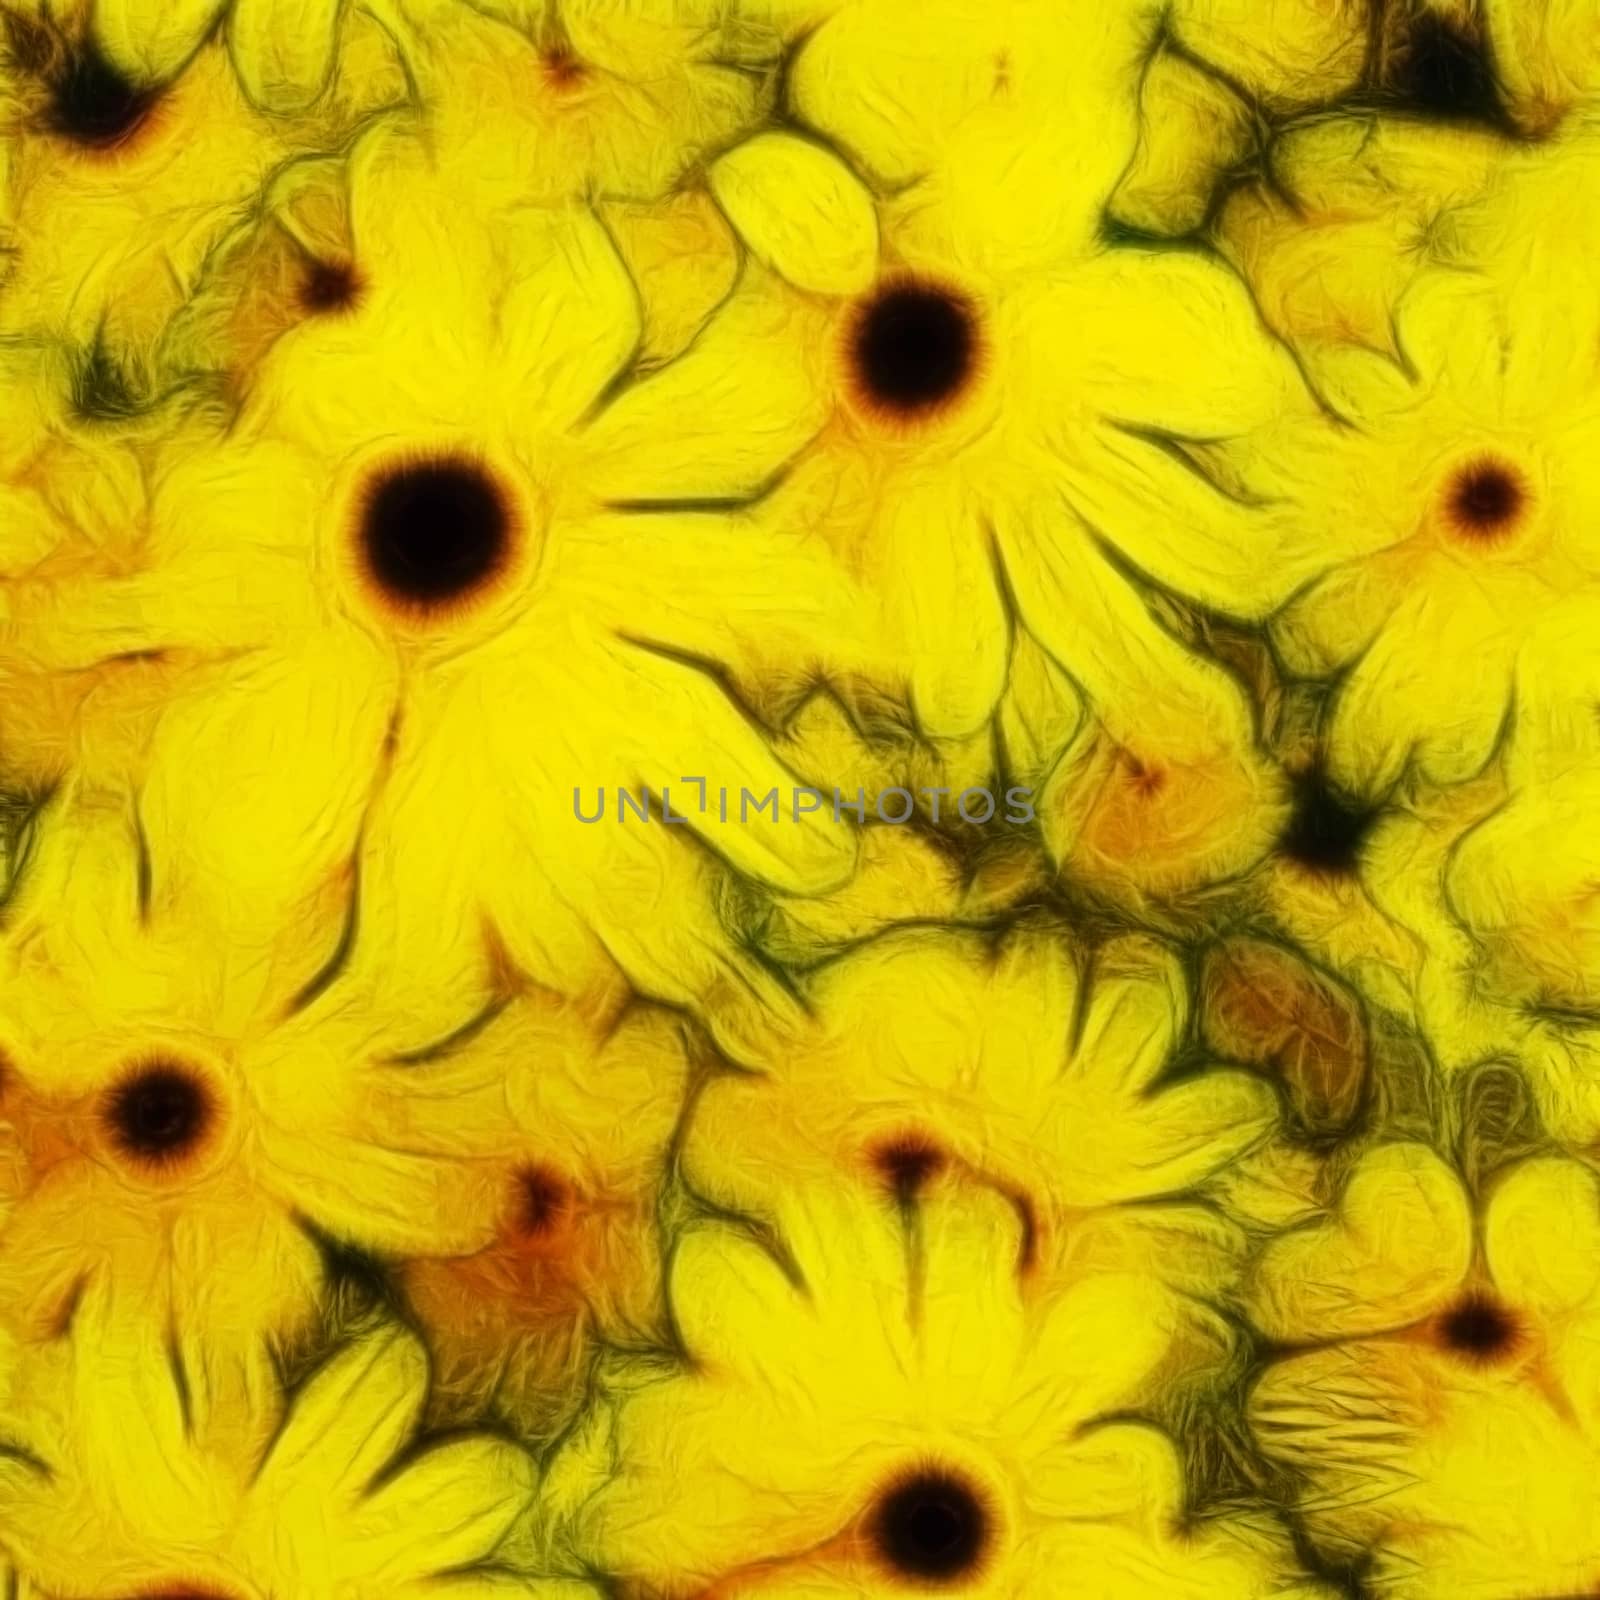 Floral Abstract. Yellow black-eyed buds